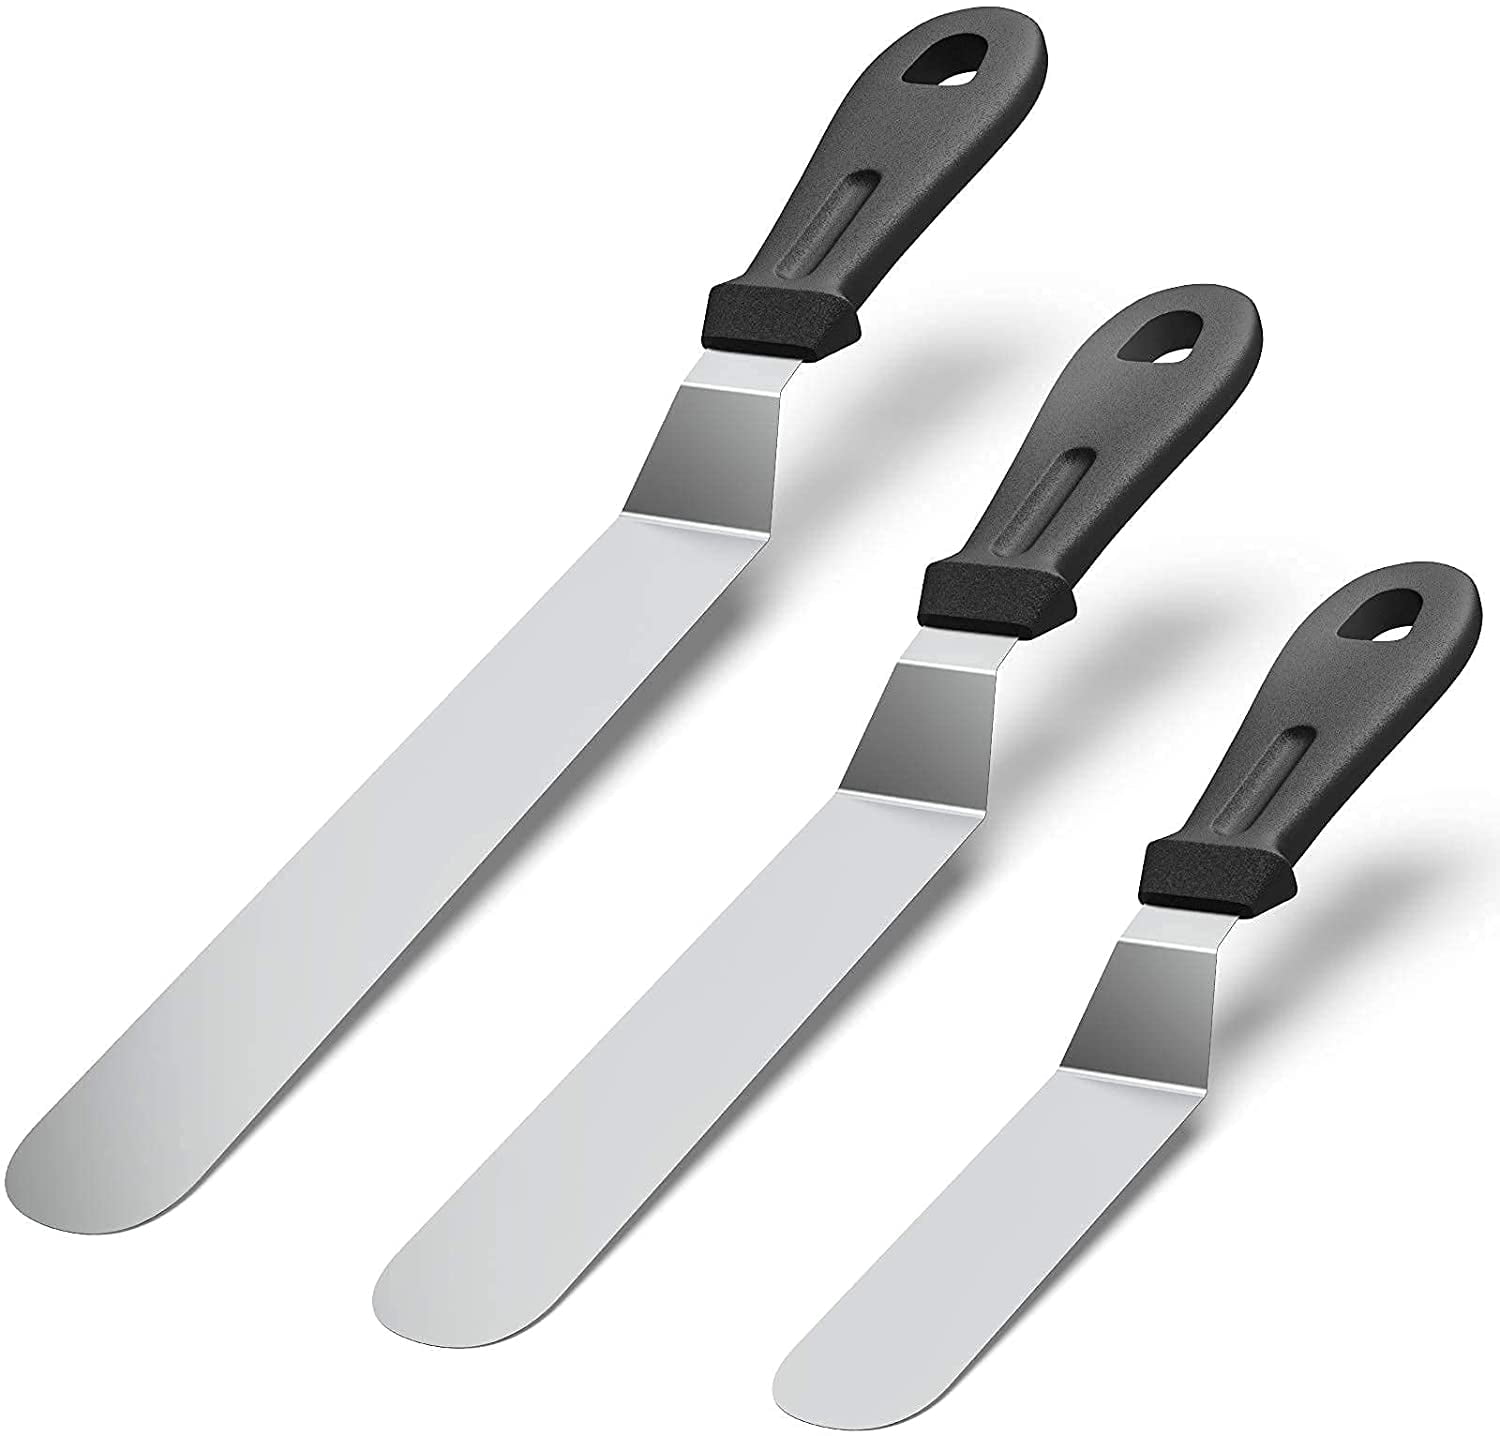 Cake Spatula 7 Packs Include 3 Cake Scrapers 8 Stainless Steel Blades 3 Scrapers Blue Icing Spatula Offset Spatulas For Baking Forc Icing Spatula Frosting Spatula Set with 6